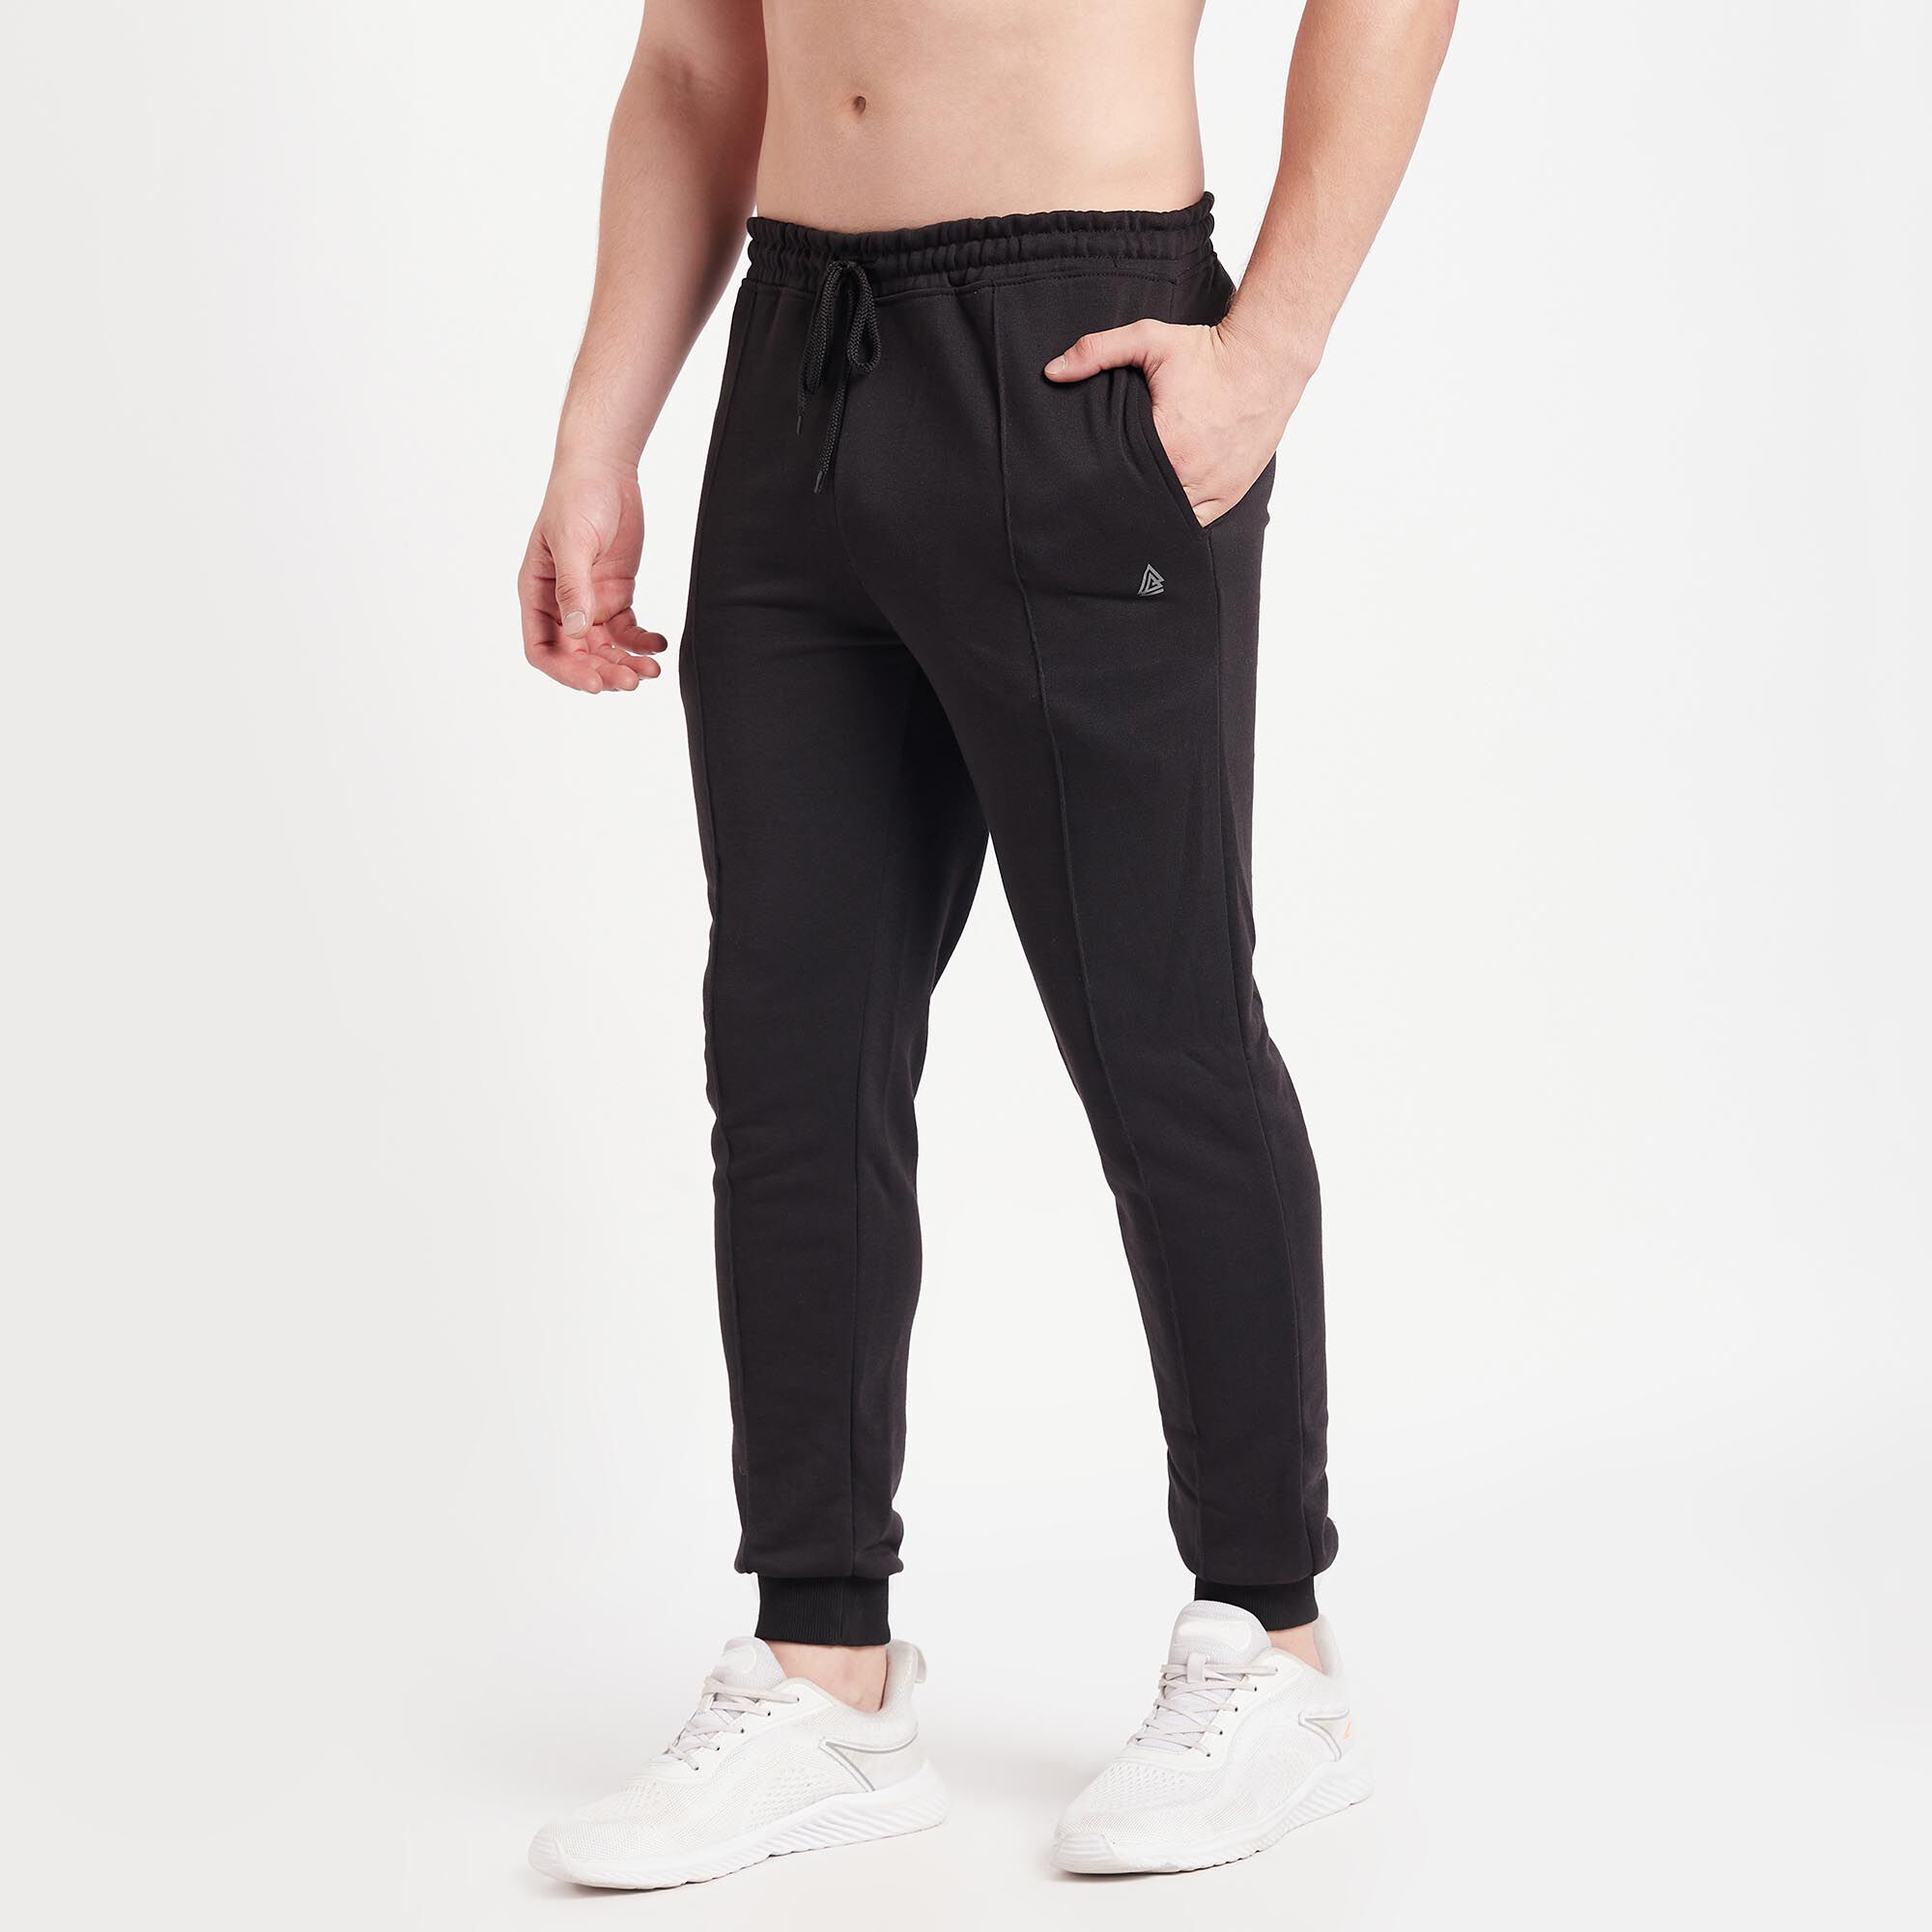 TechnoSport Men's Dry-Fit Solid Track Pants White Gray (P-474) | Qfit.qa -  Online Shopping in Qatar